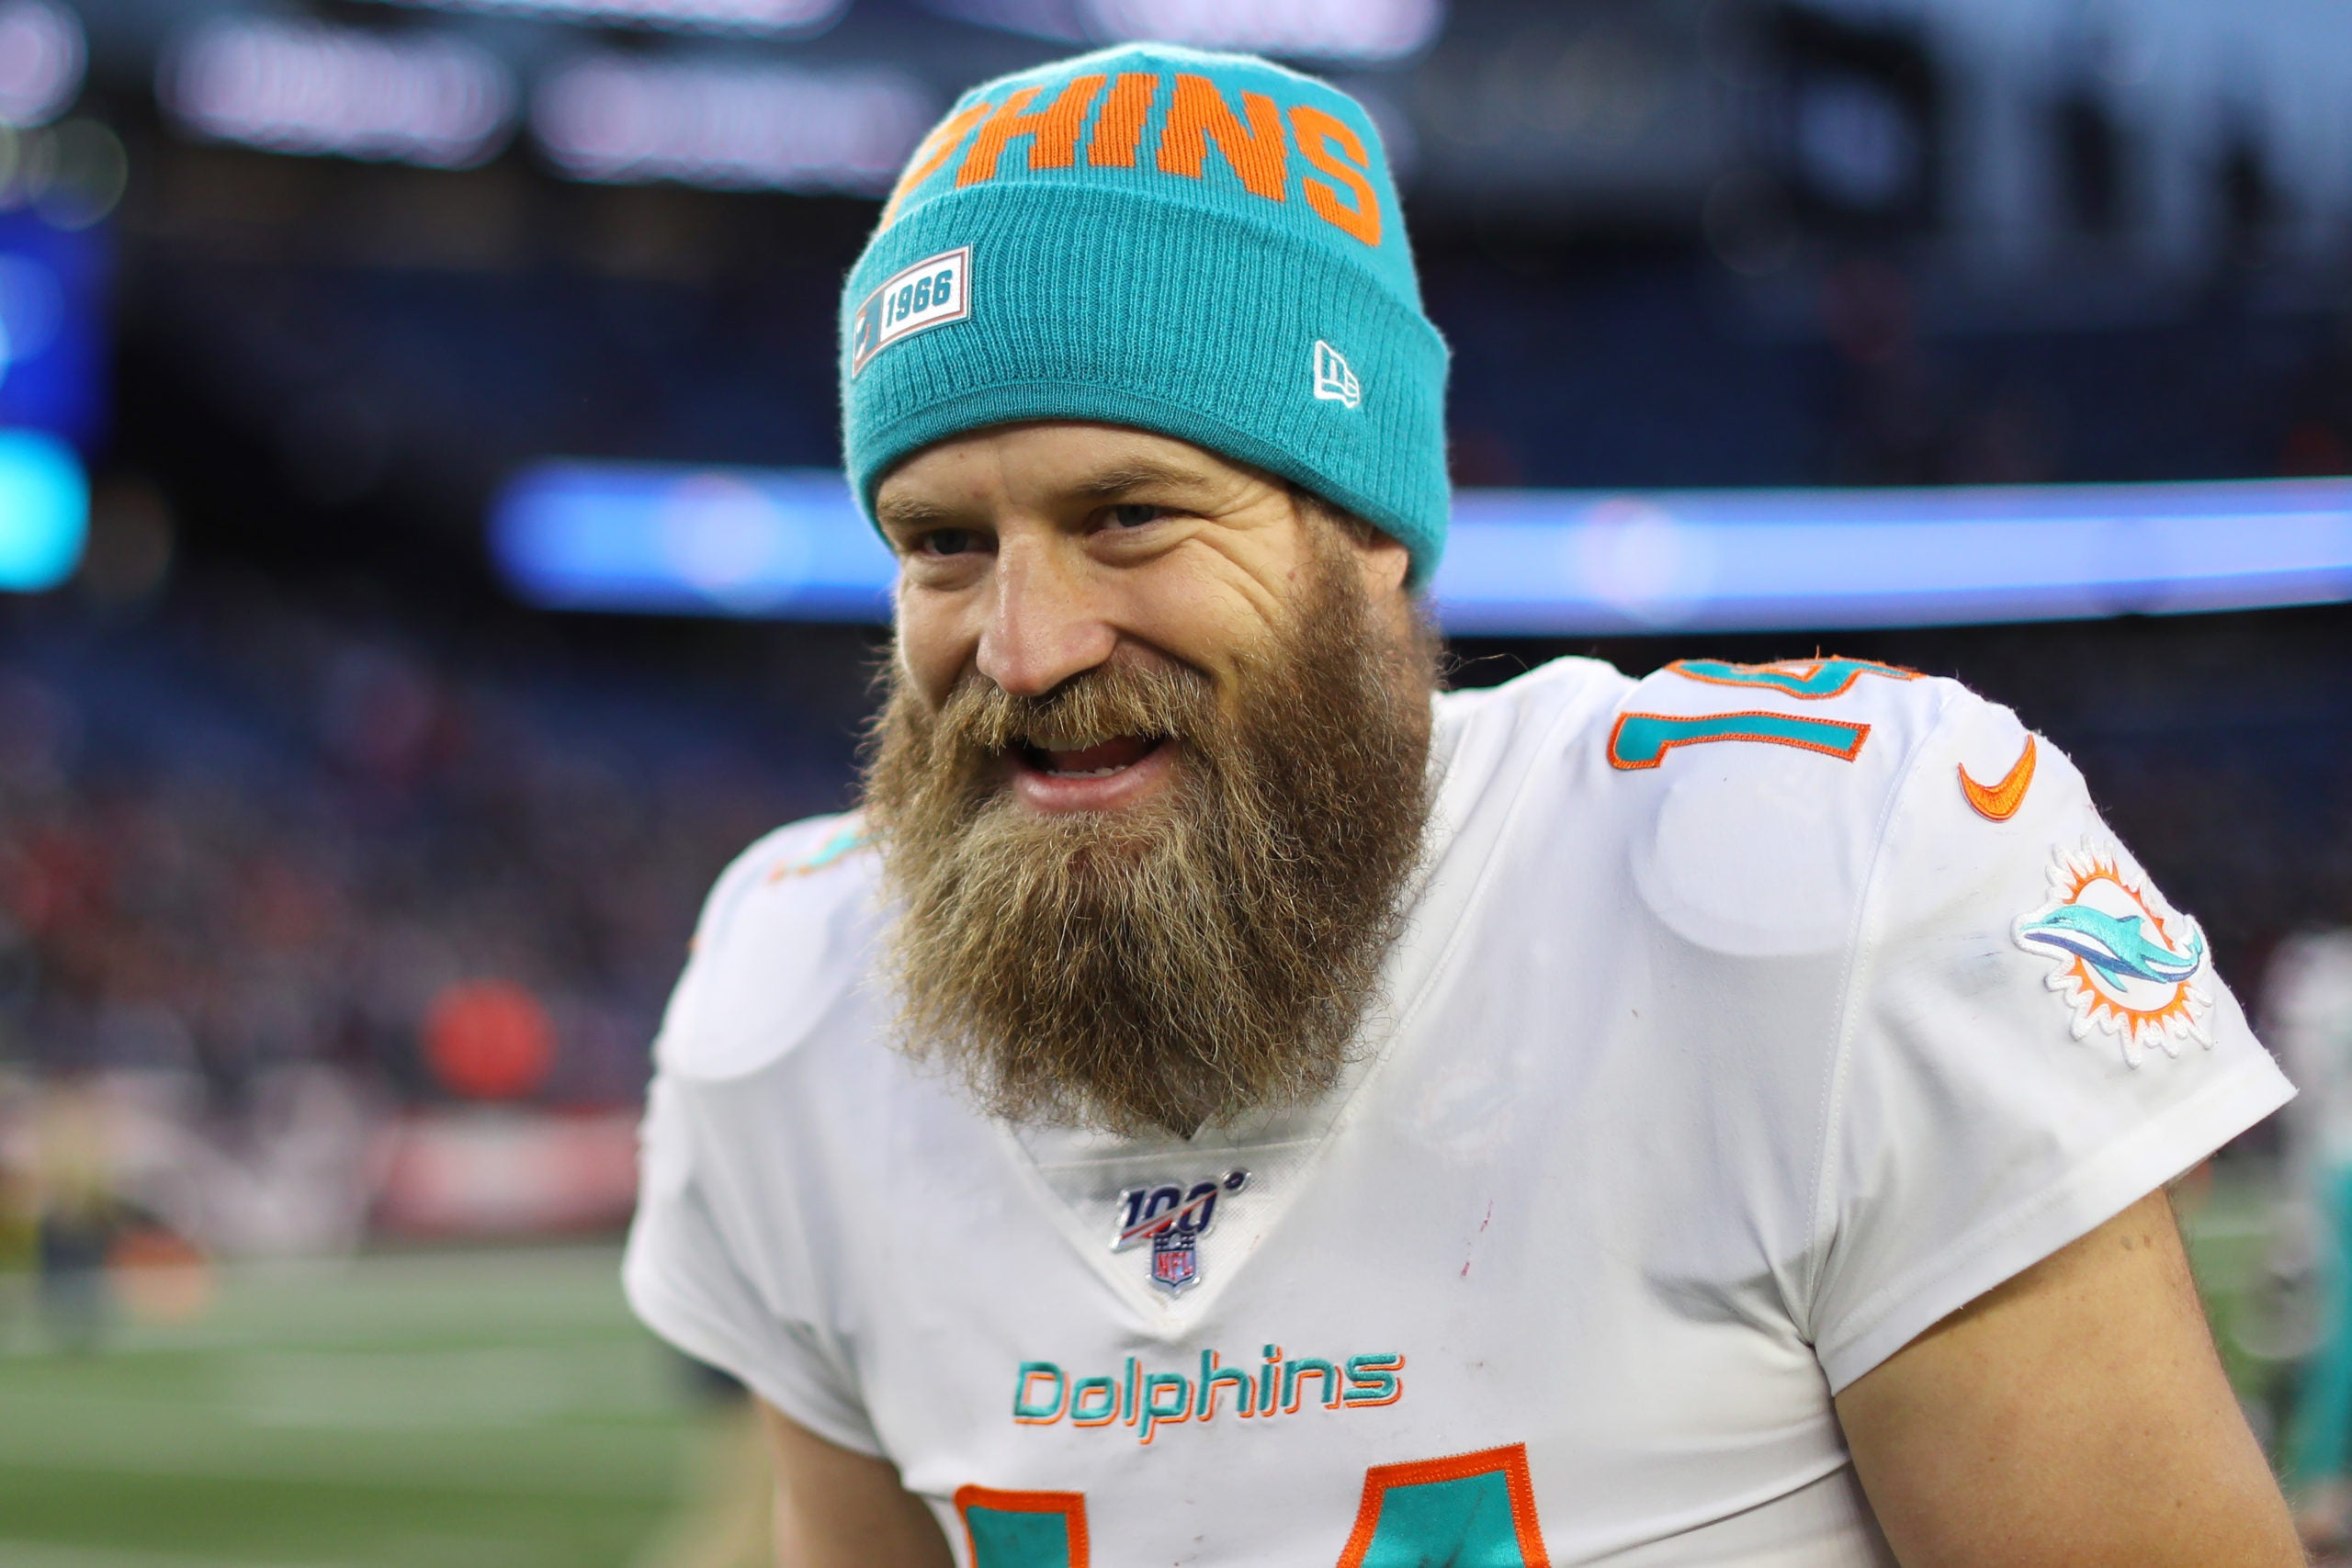 Ryan Fitzpatrick's changing teams again — see photos of him in 6 different  jerseys